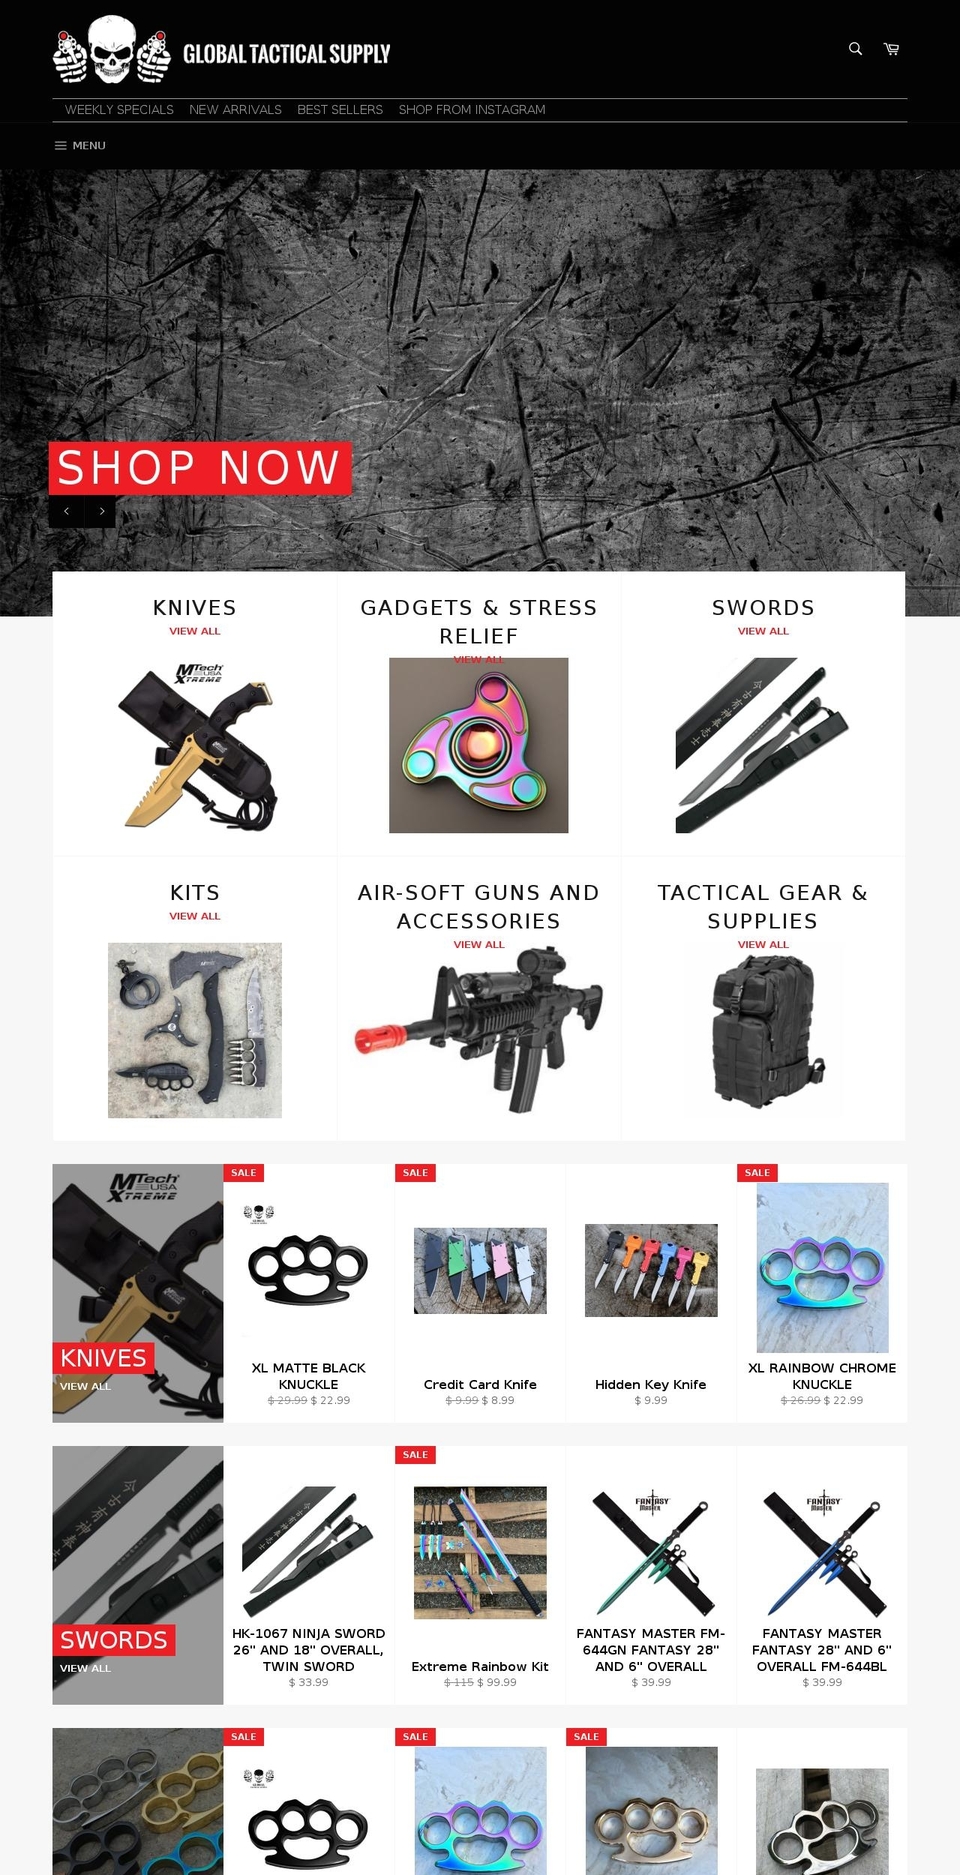 Alchemy Shopify theme site example globaltacticalsupply.com